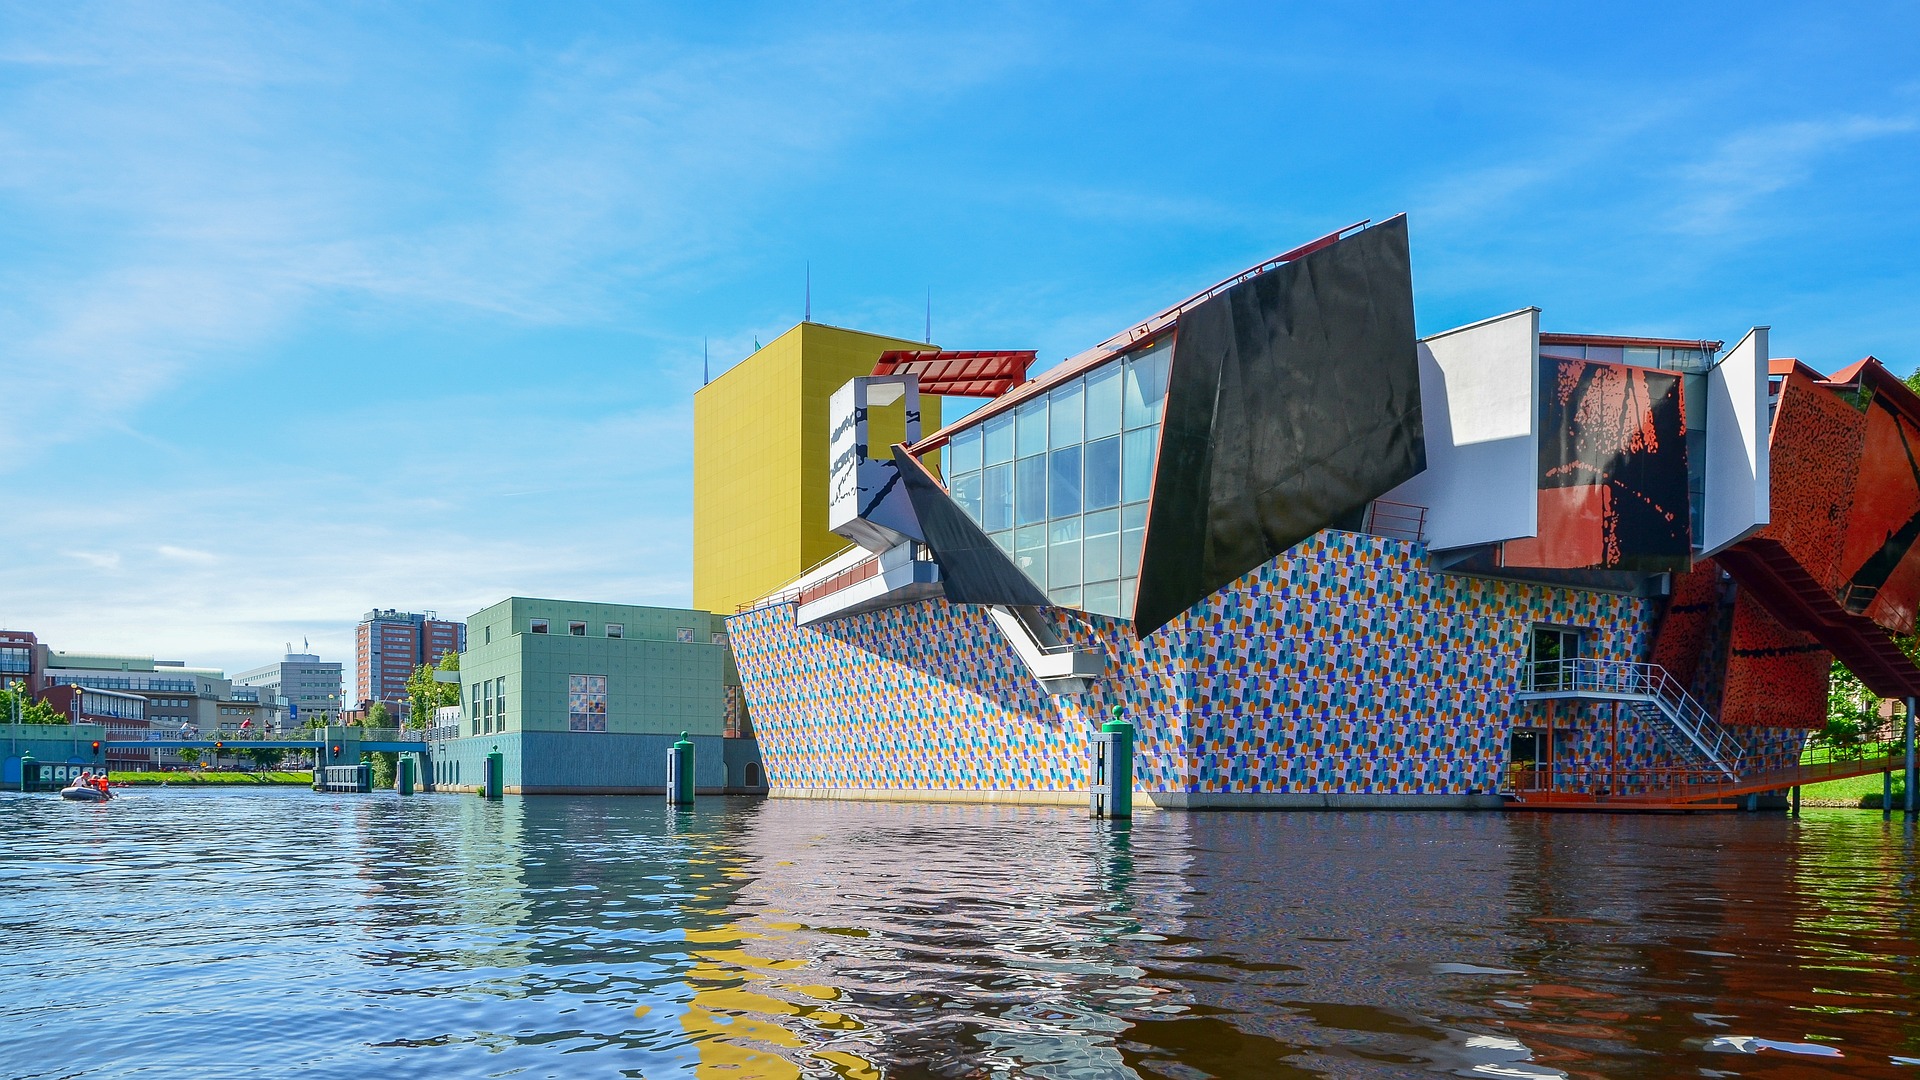 New Deconstructivist Building of Groninger Museum as Replacement of Old Museum, Showing All Features of Deconstructivism